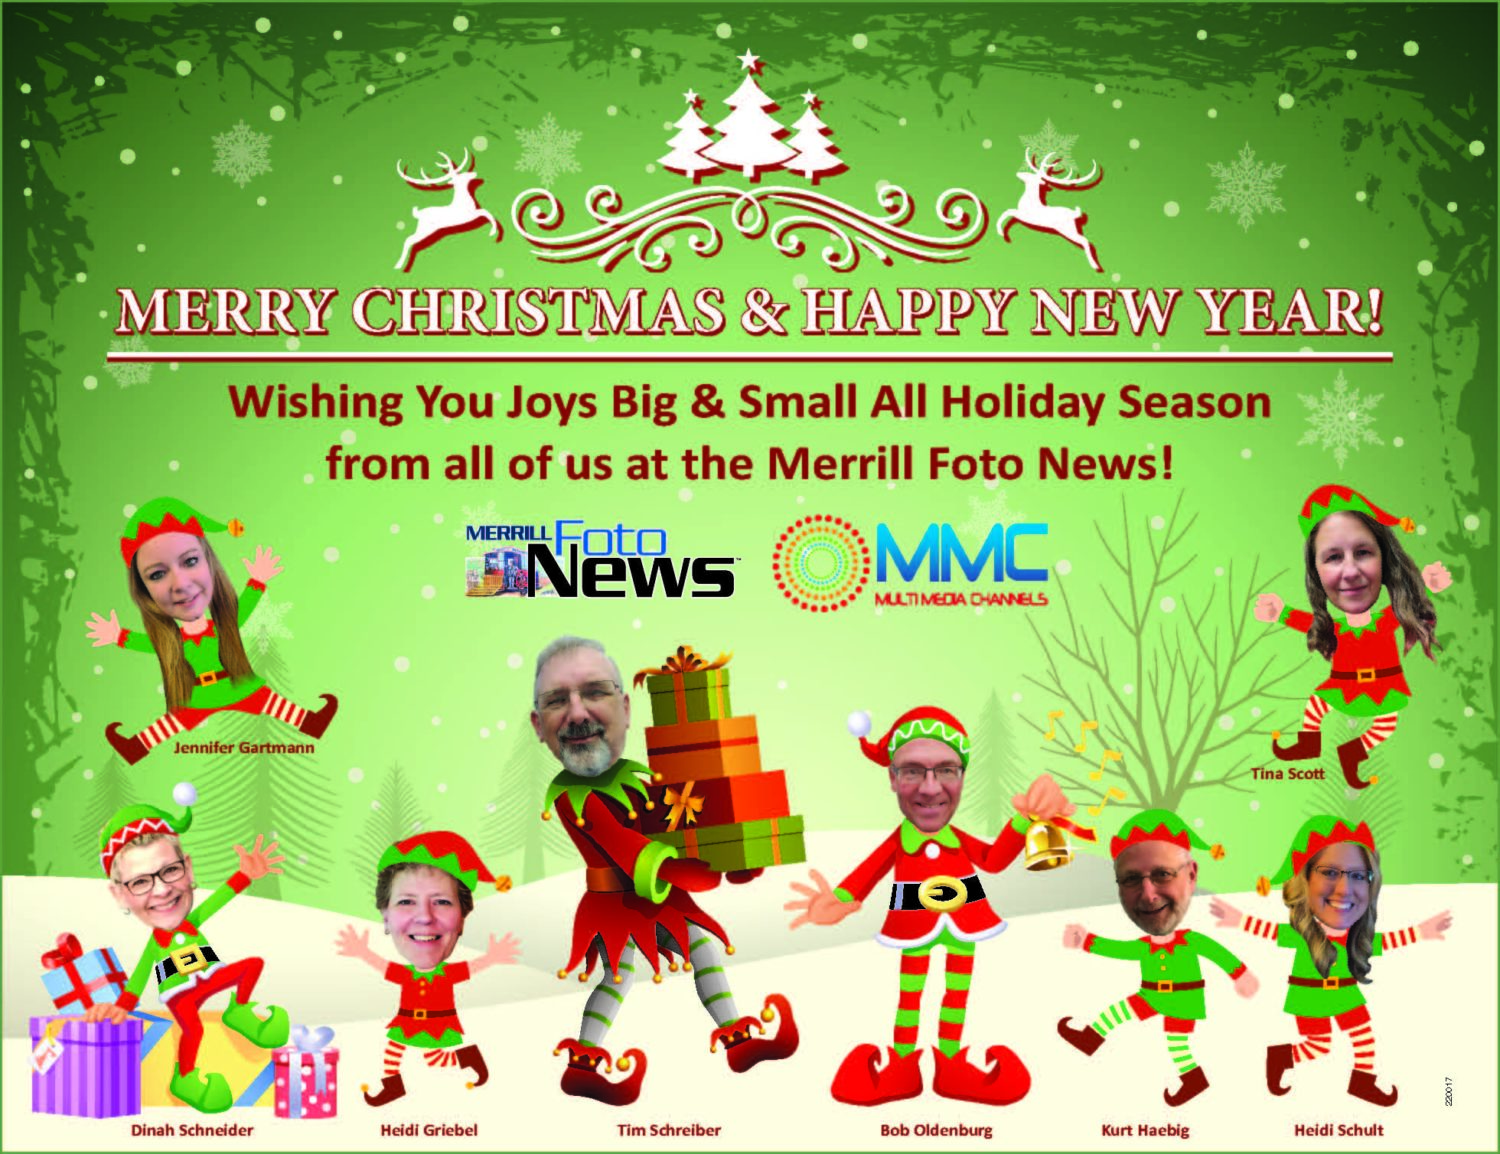 Merry Christmas and Happy Holidays from the Merrill Foto News staff